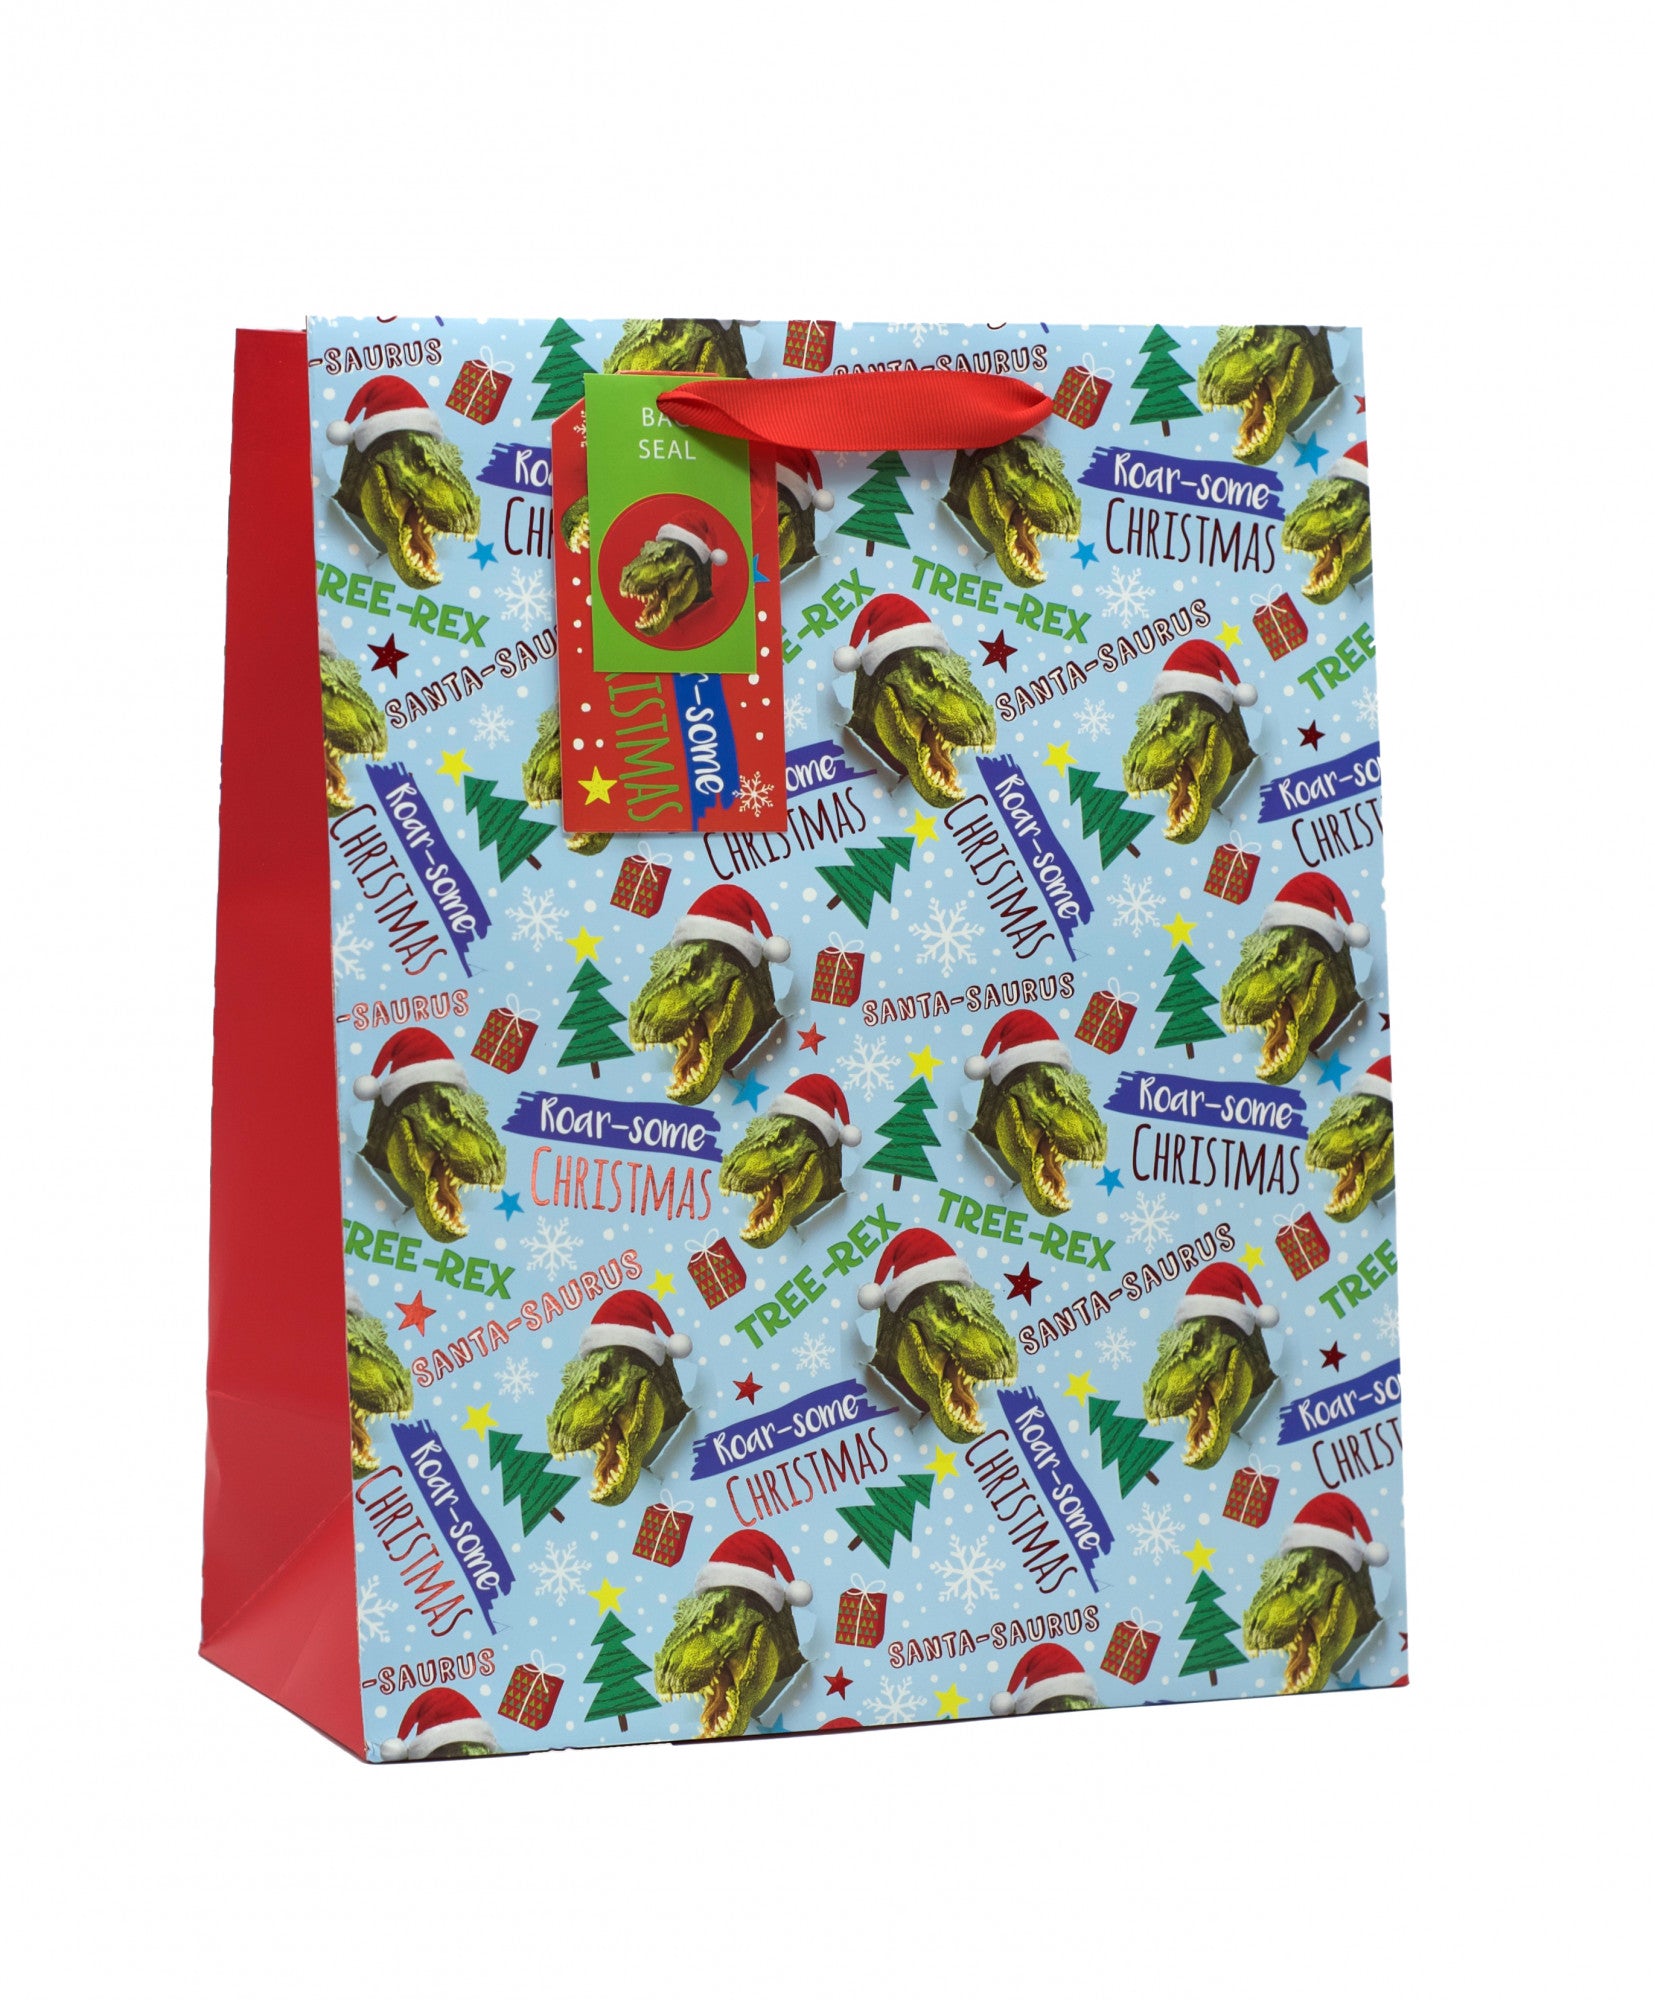 View RoarSome Christmas Large Bag information